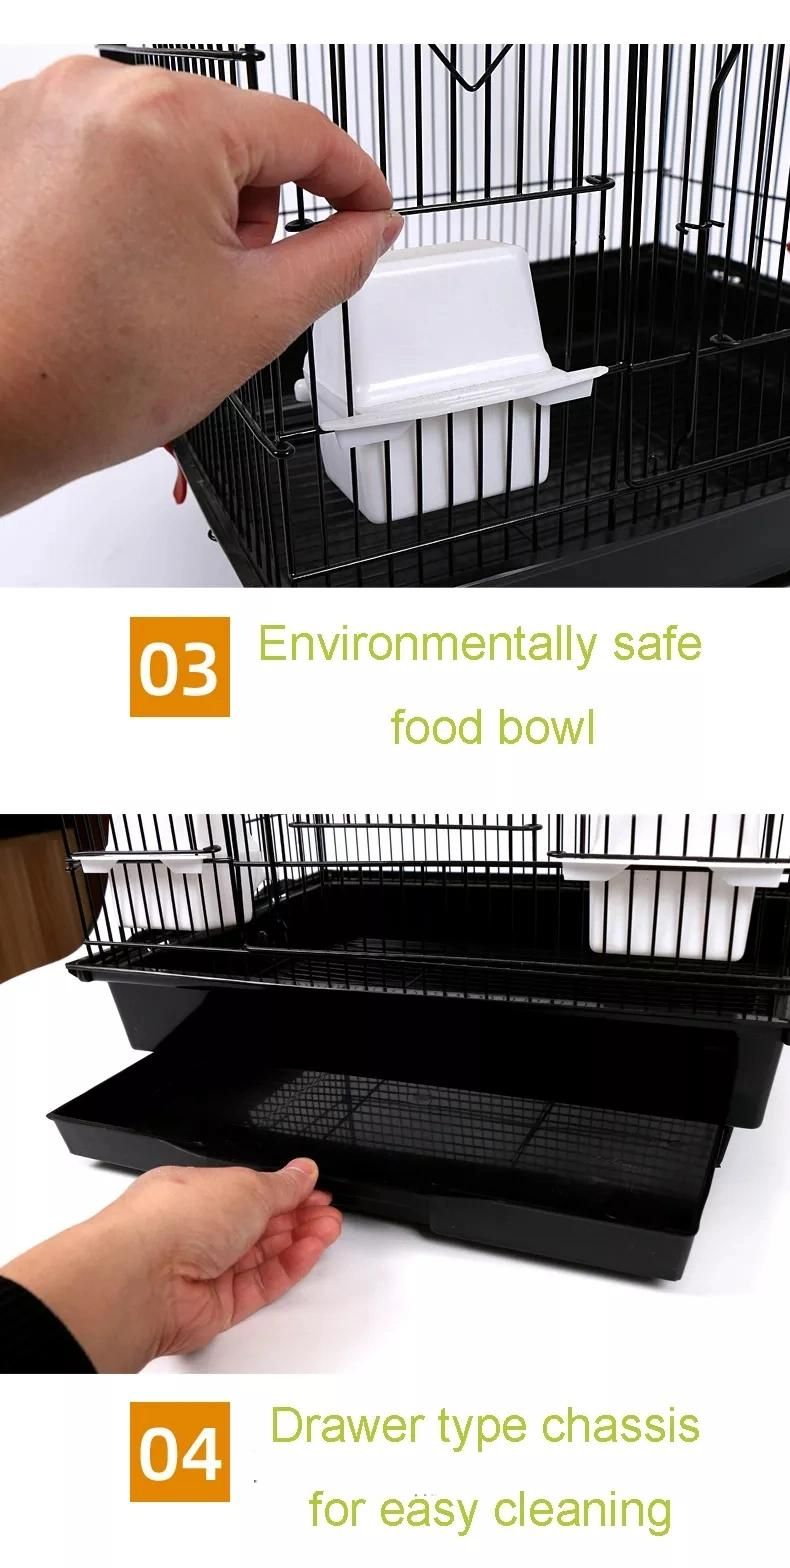 Factory Direct Large Parrot Cage Outdoor Multi Layer Bird Cage